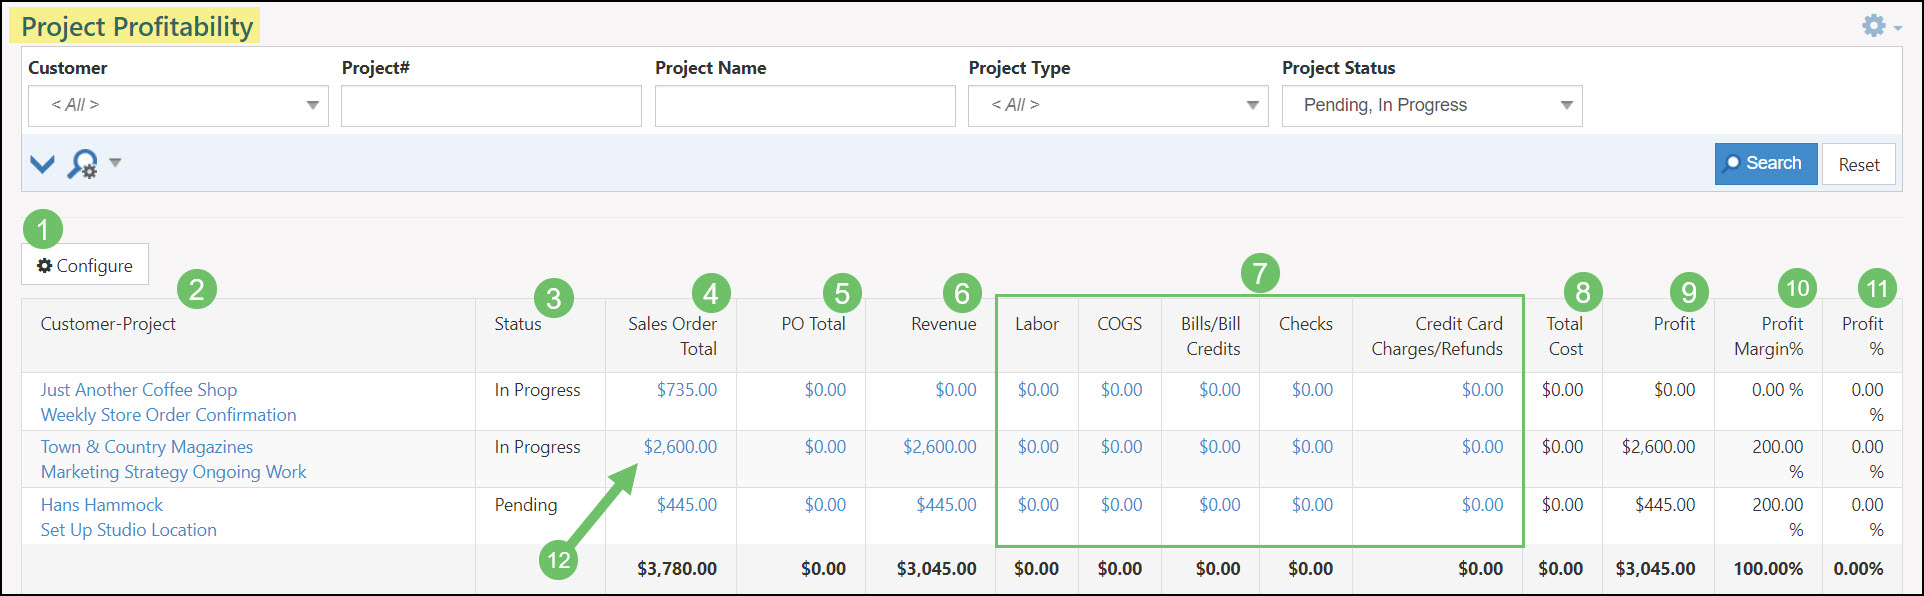 Image of the Project Profitability Report within Striven displaying all possible Expense Columns on the report.